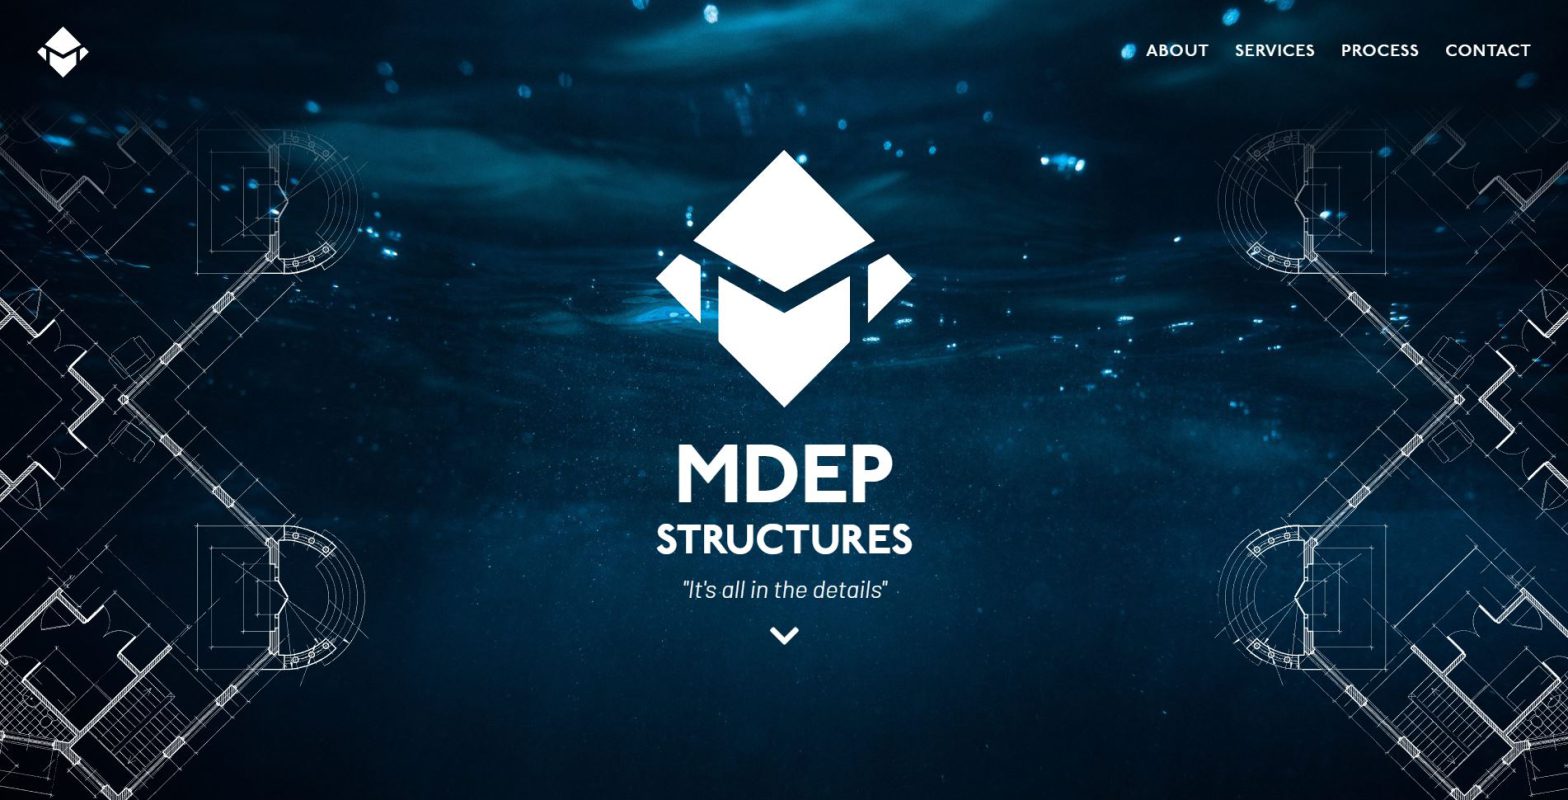 MDEP Structures